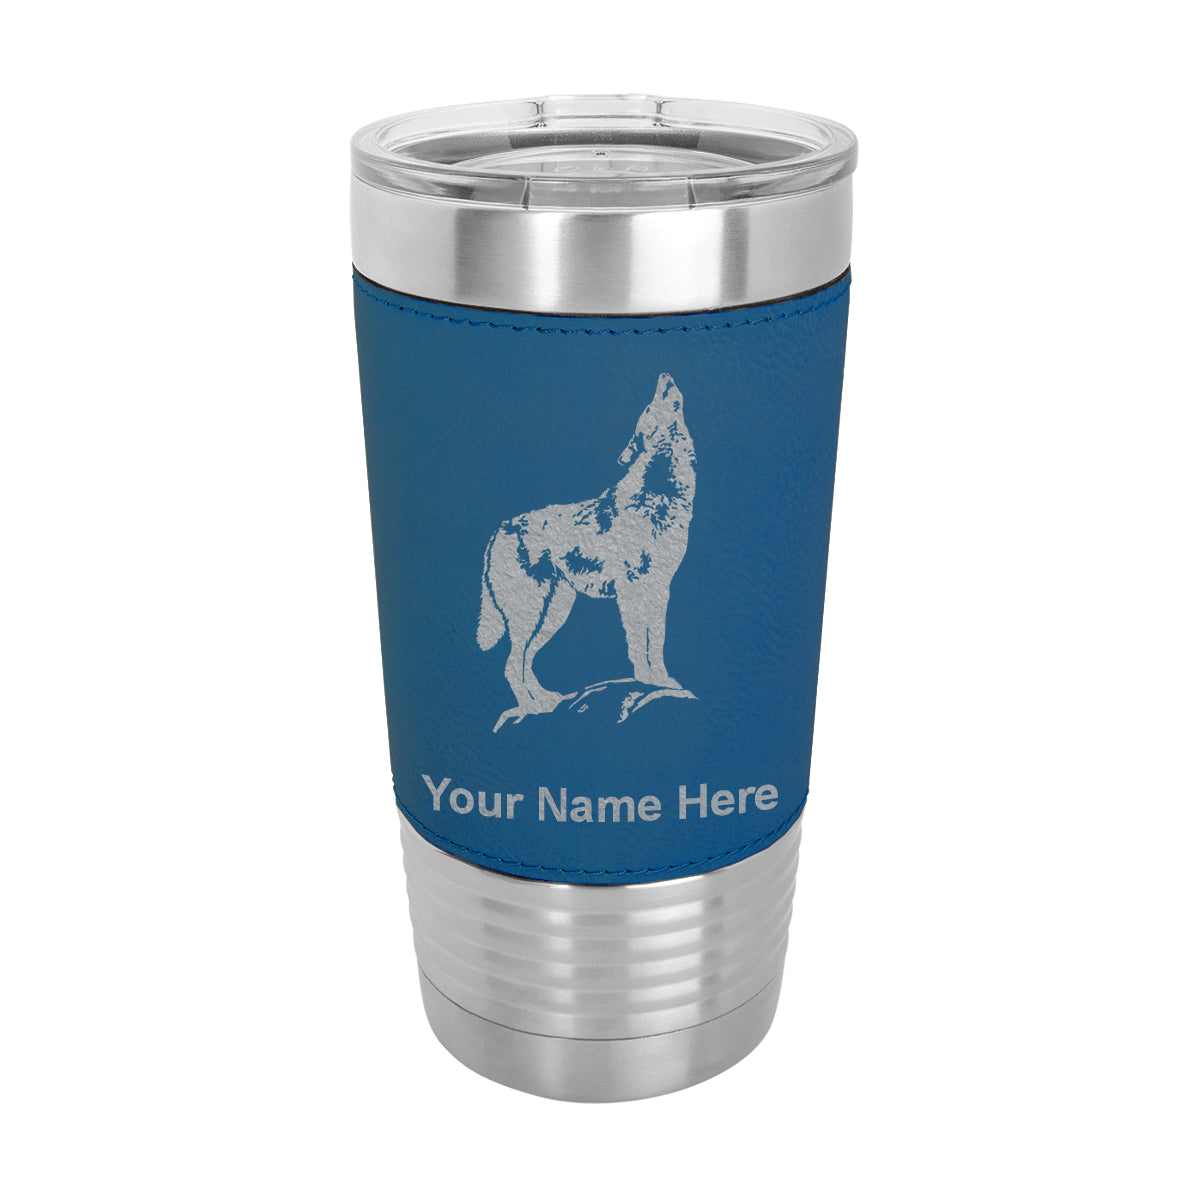 20oz Faux Leather Tumbler Mug, Howling Wolf, Personalized Engraving Included - LaserGram Custom Engraved Gifts